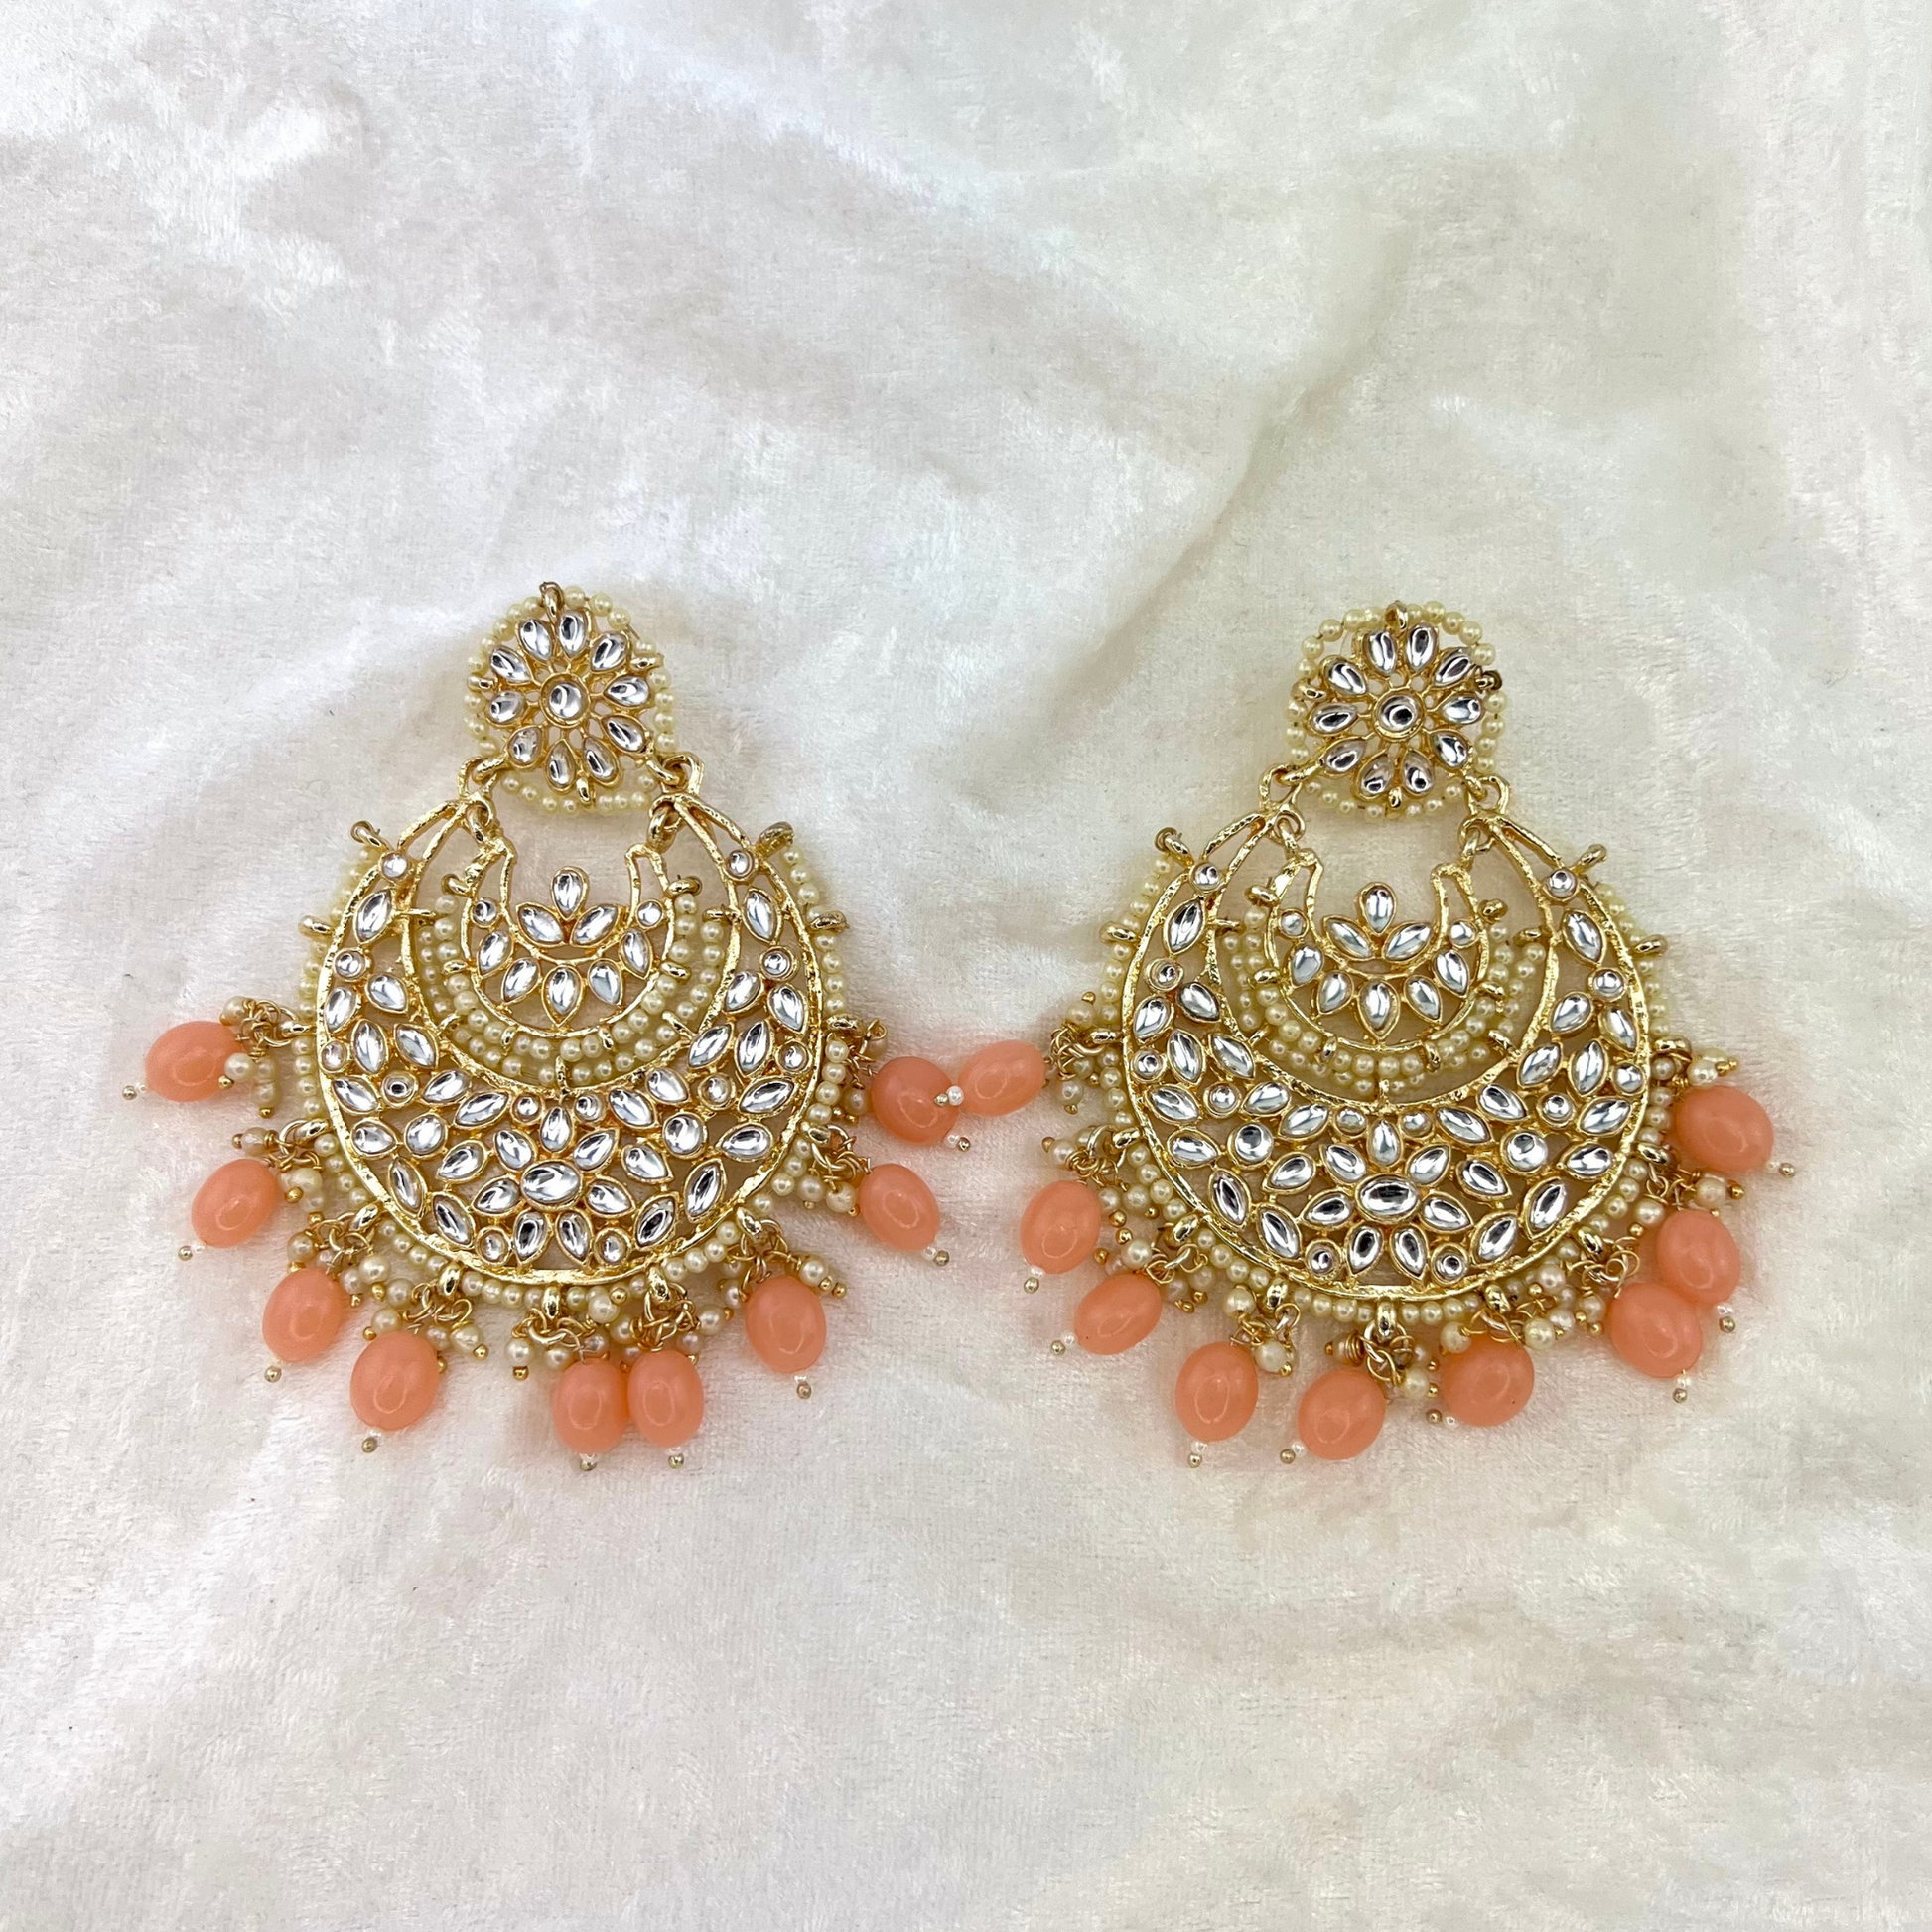 Indian wedding jewellery - large earrinfs with high quality stones and beads in peach